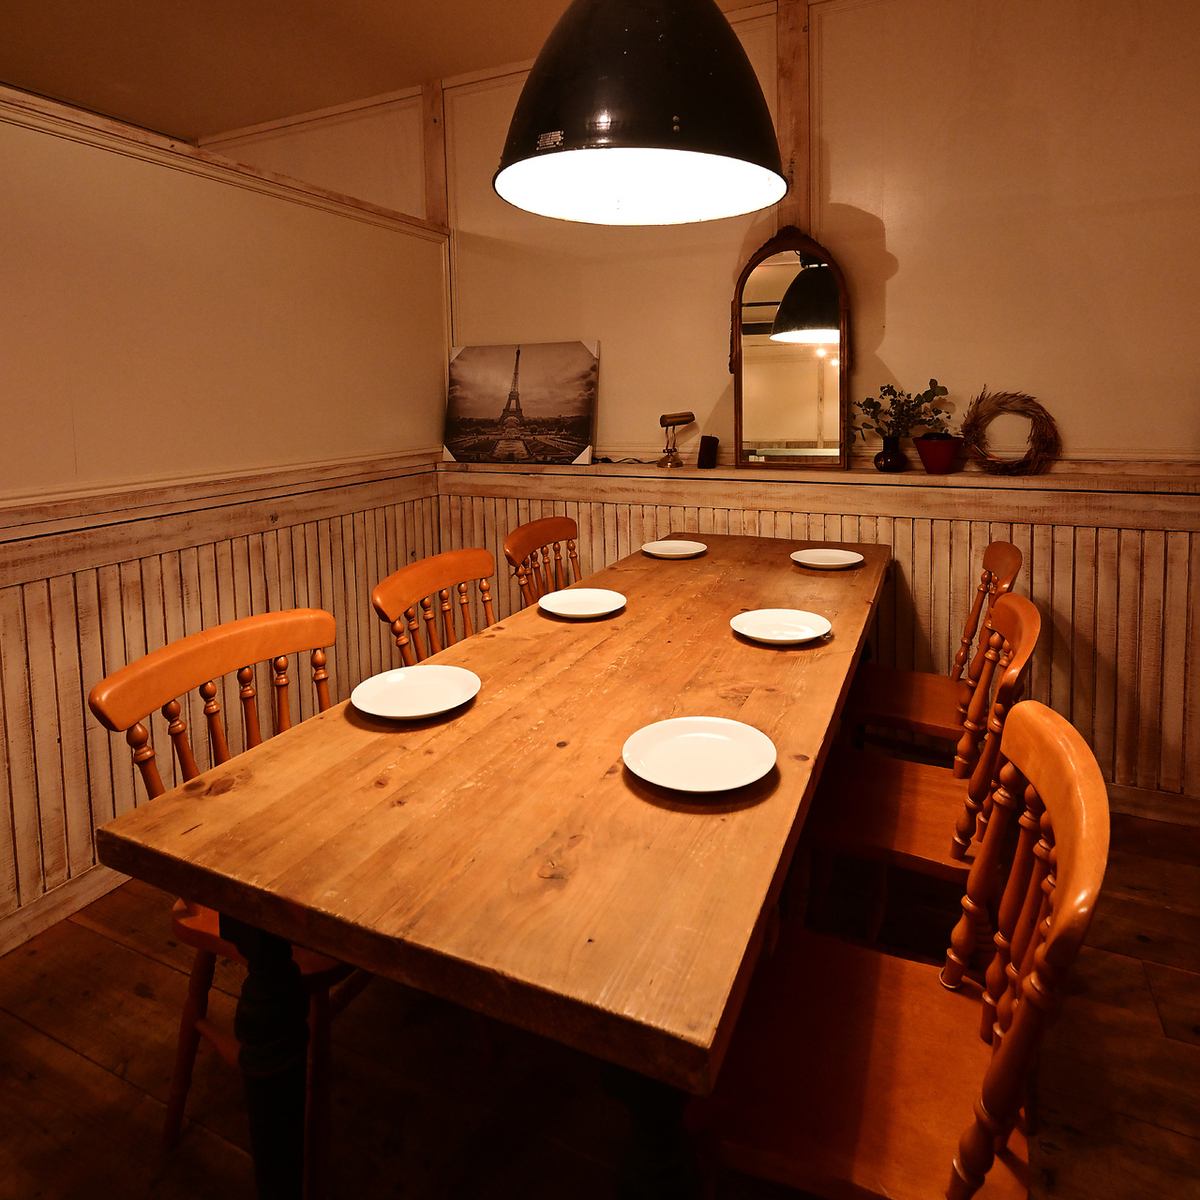 We have private rooms available for a small number of people!